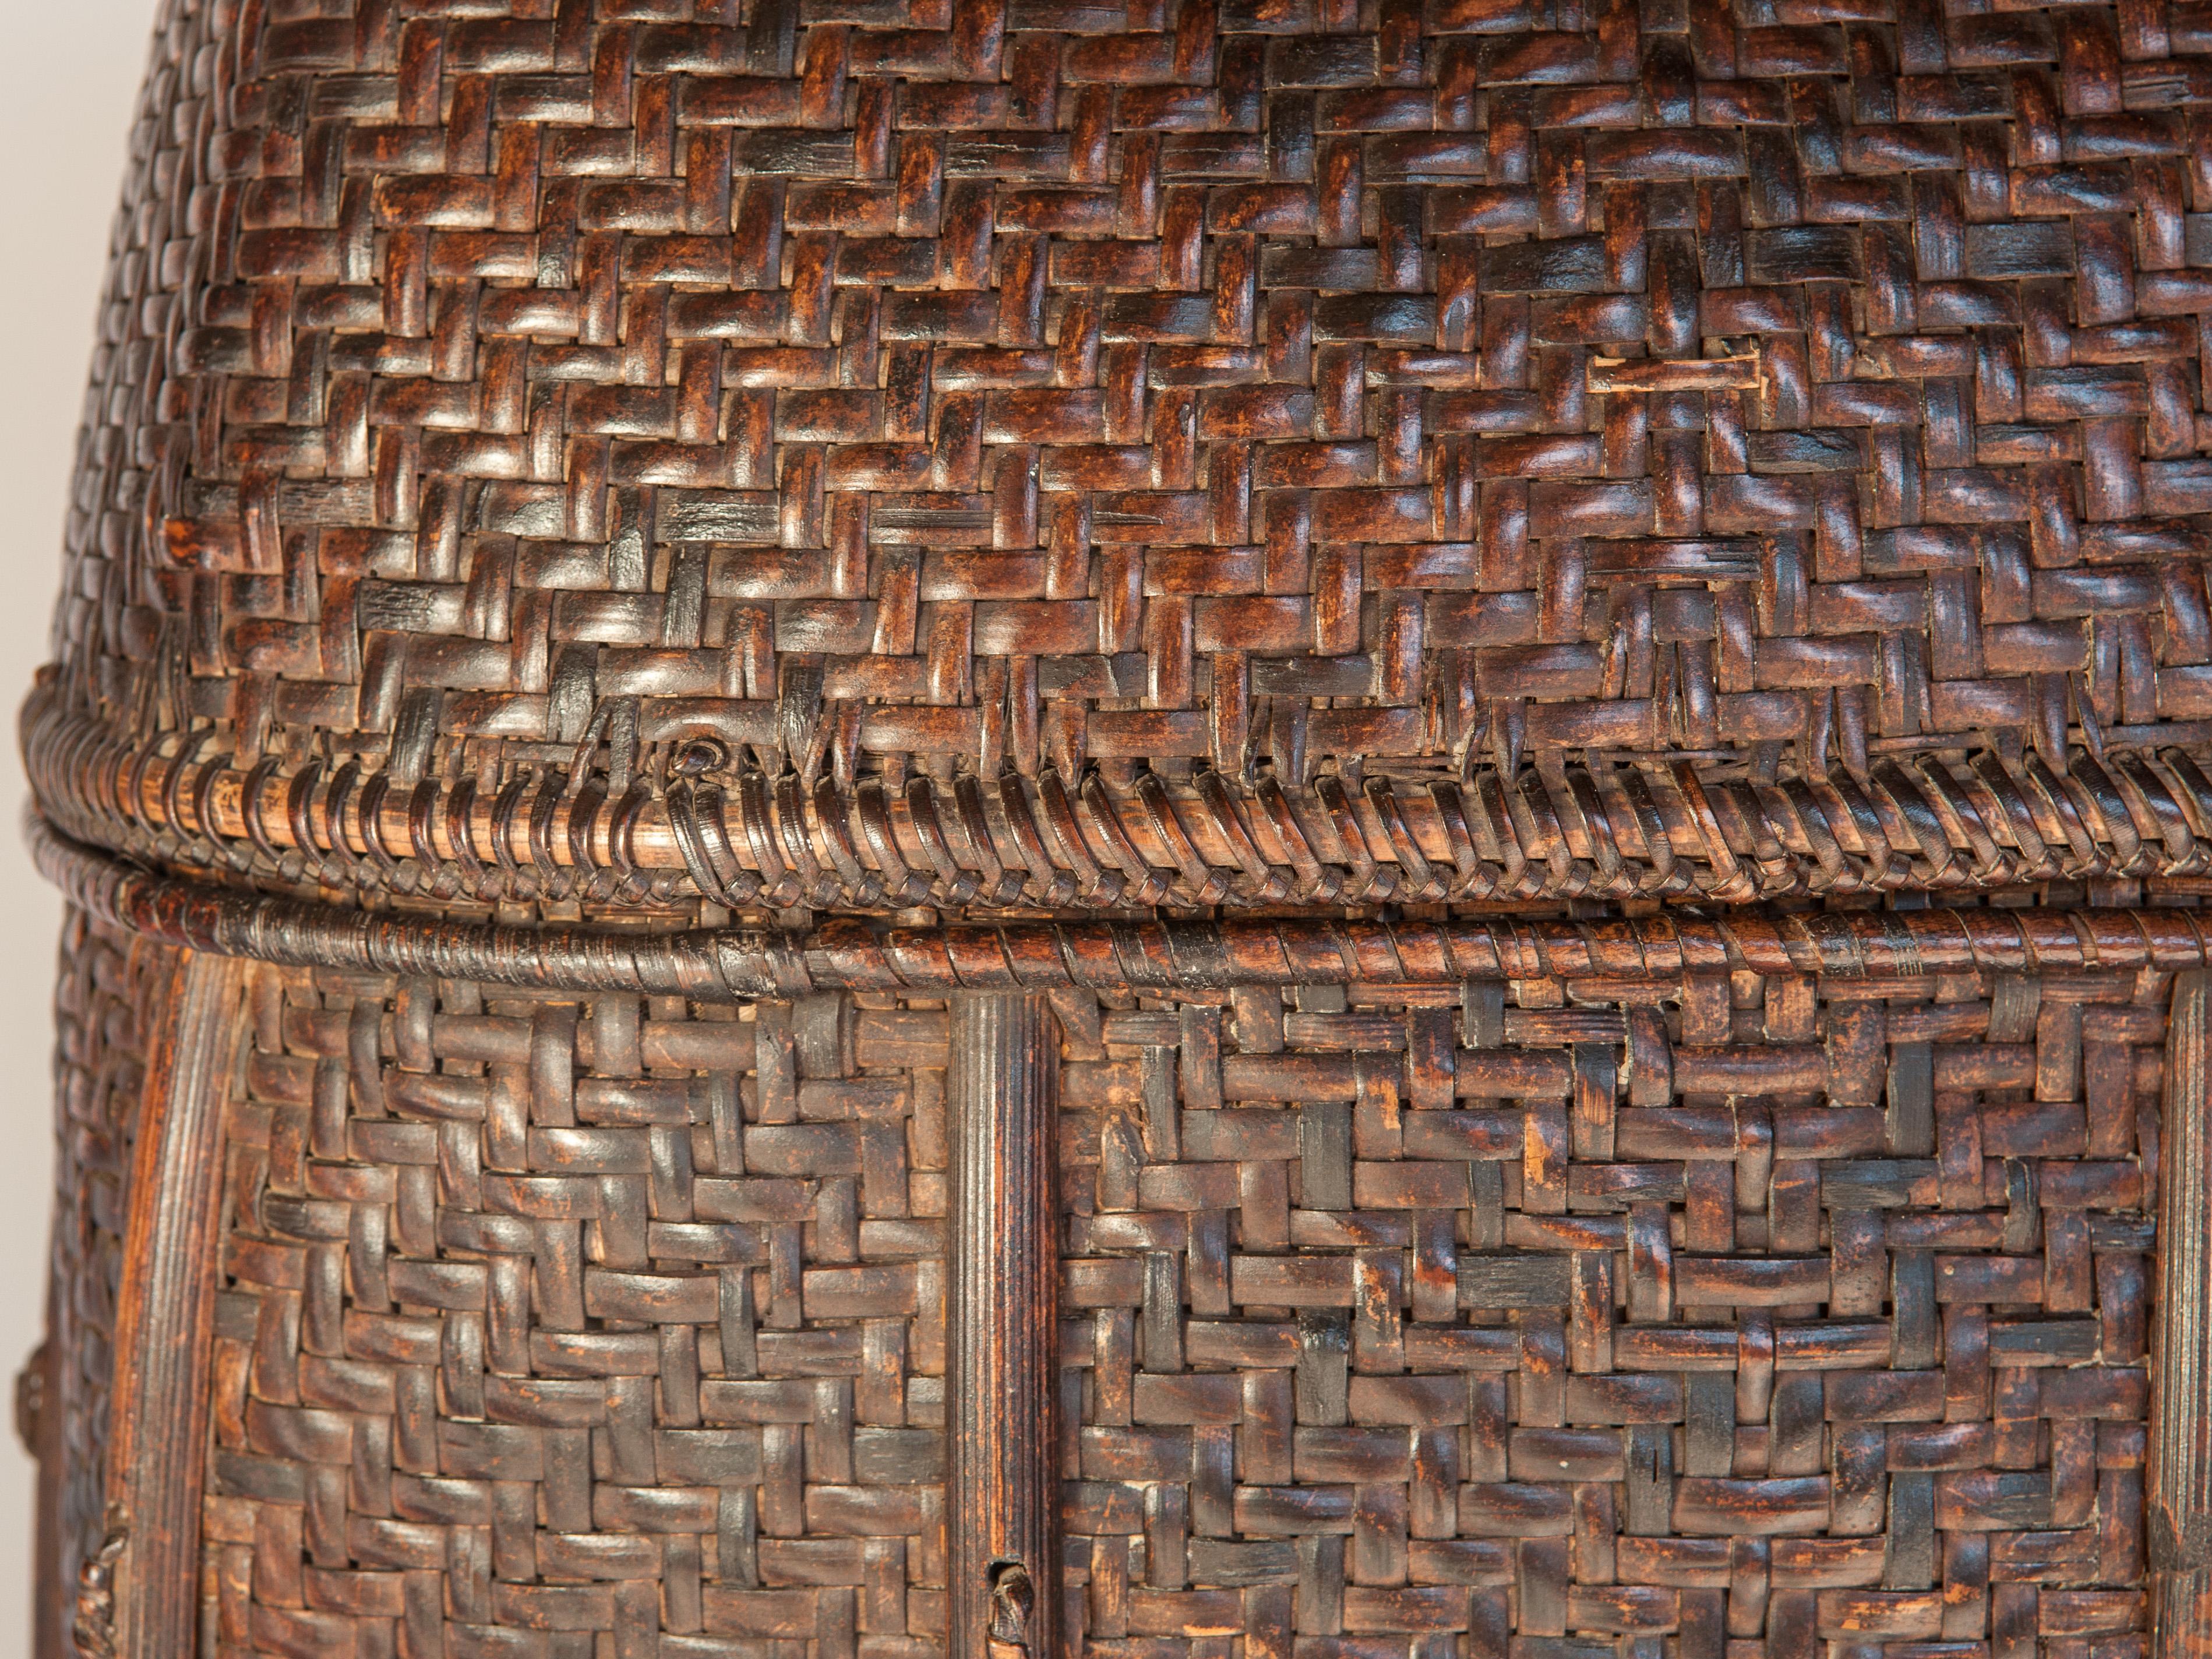 Vintage Bamboo Storage Basket from the Akha of North Thailand. Mid-20th Century.
Handwoven storage baskets such as these were (and are) used to store textiles or other household goods. This one is woven utilizing a robust double weave, and